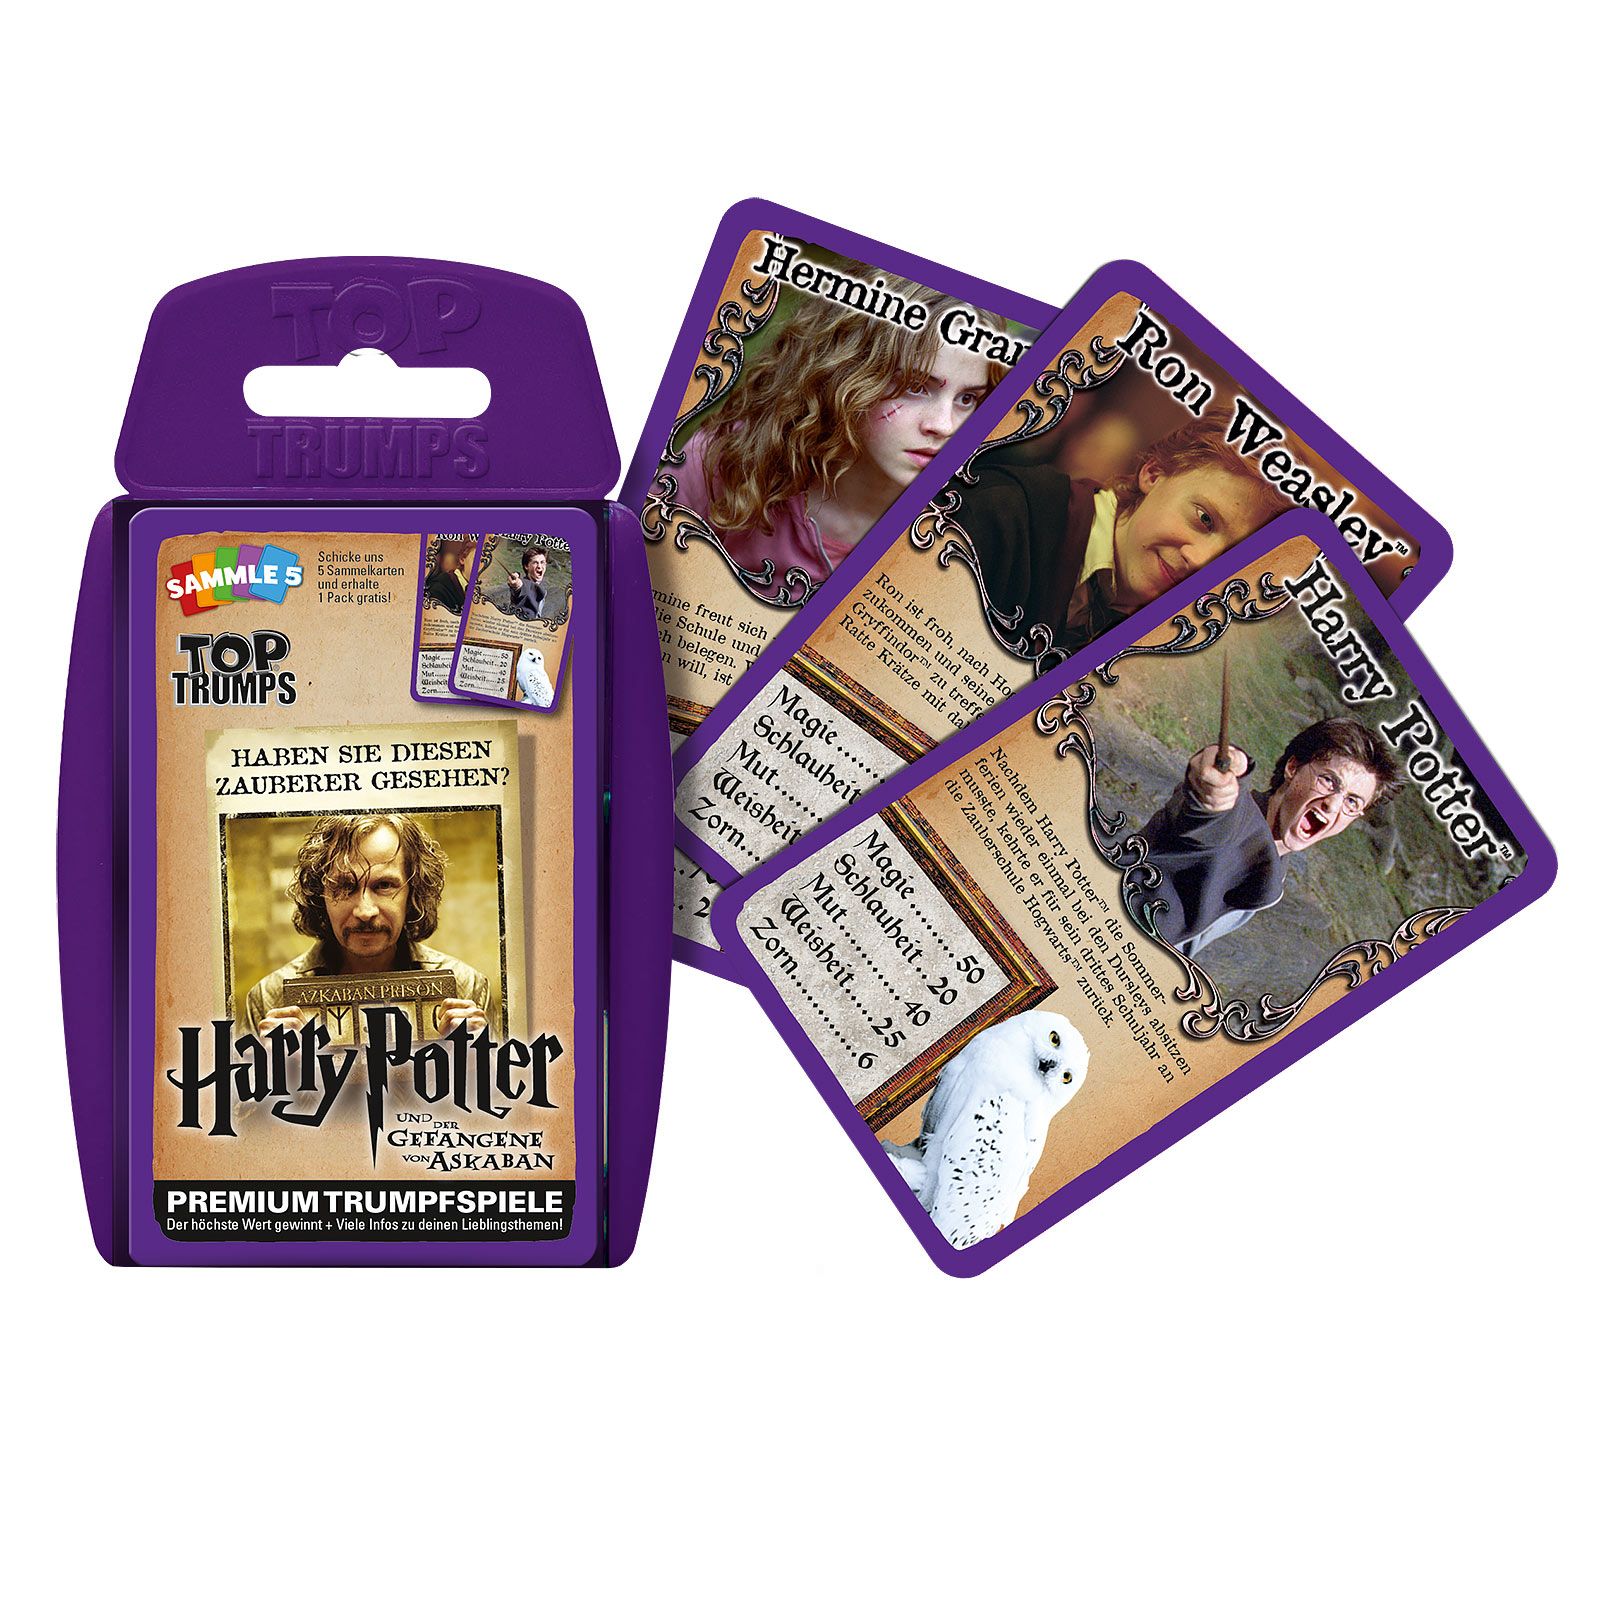 Harry Potter and the Prisoner of Azkaban Top Trumps Playing Cards